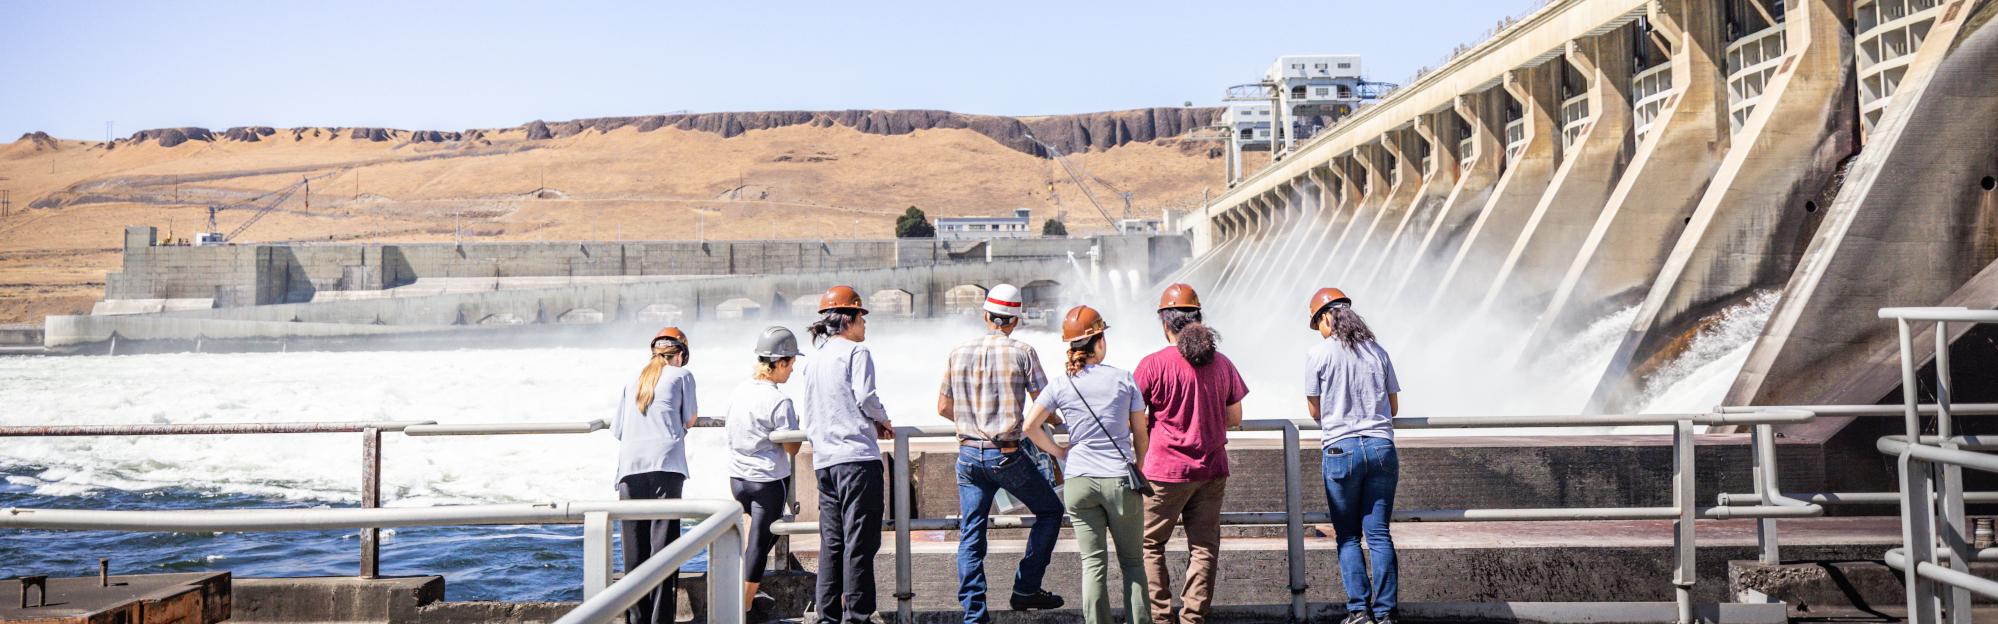 Group of people looking at a hydroelectric dam